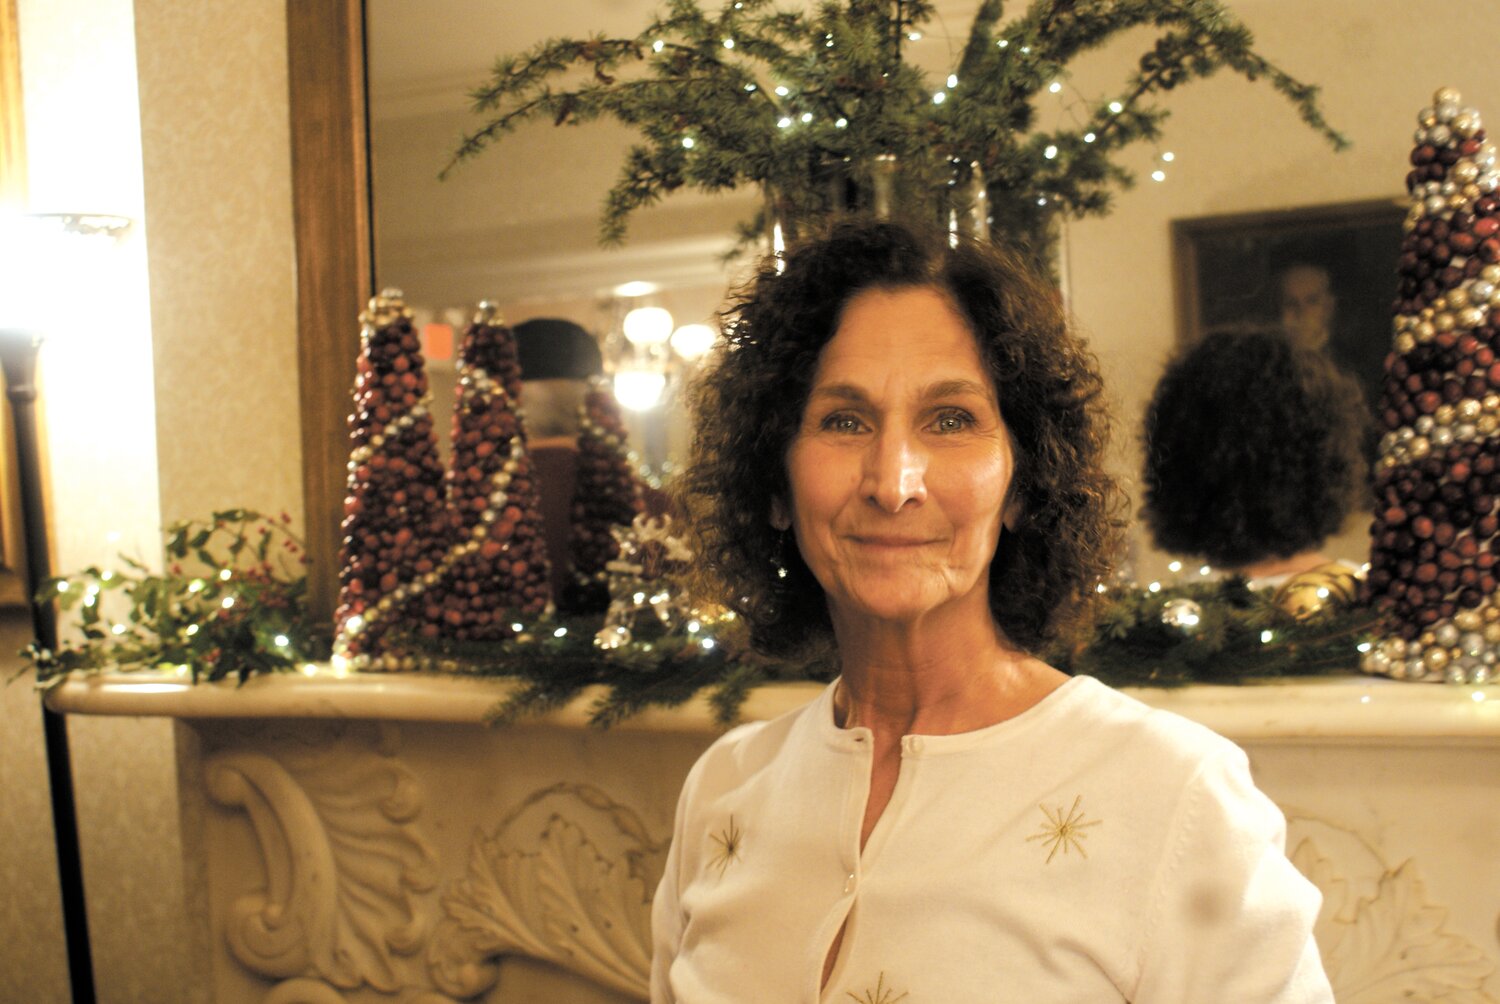 CROWNED WITH BOUGHS: Western Cranston Garden Club President Cheryle Celest standing in front of just a few of the decorations her organization provided for Sprague Mansion this season.